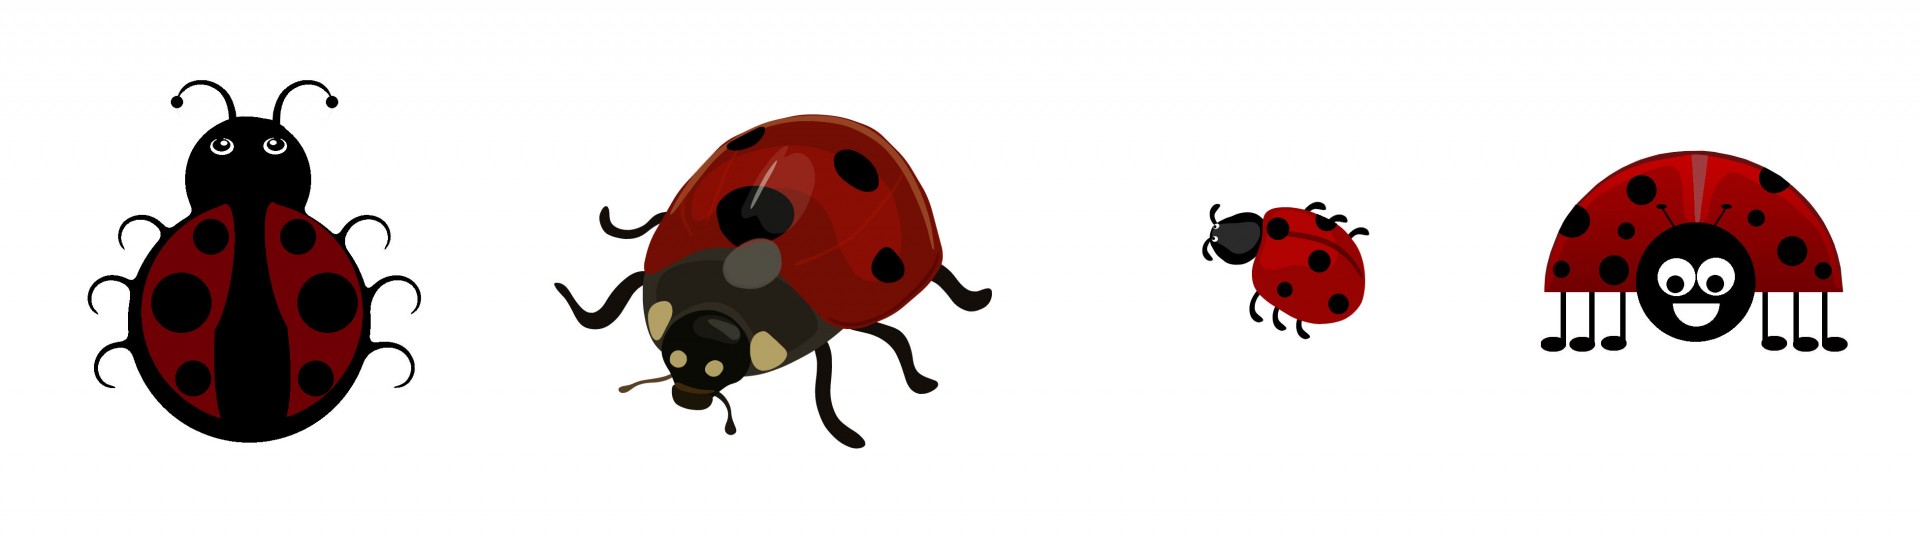 lady bugs bugs vector free photo